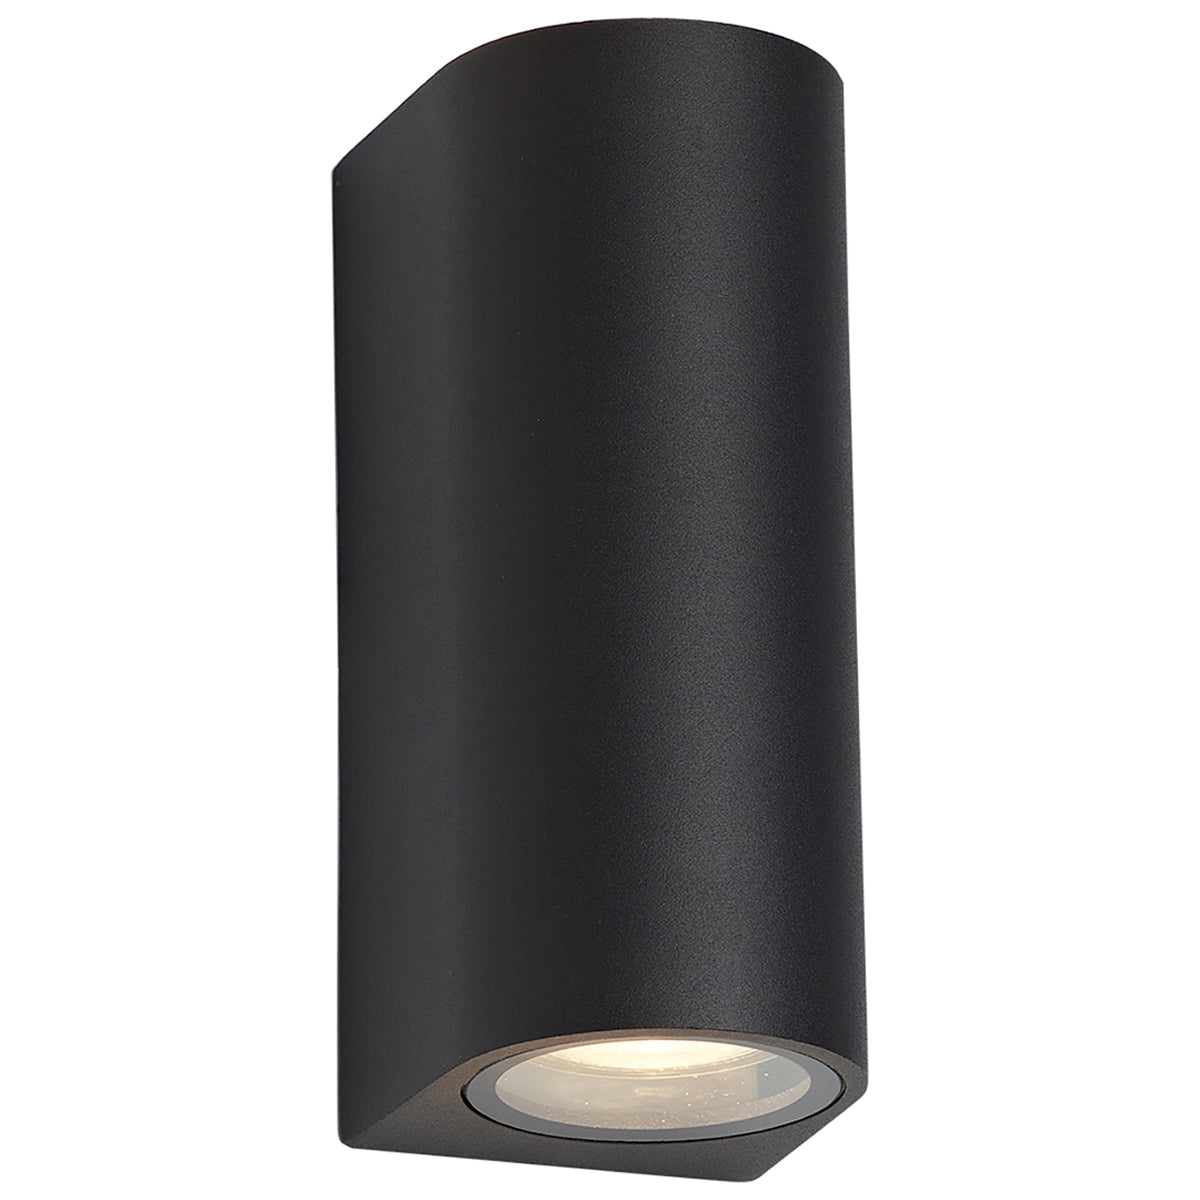 Our Eileen black wall mounted curved double outdoor spotlight light would look perfect in a modern or more traditional home design. Outside wall lights can provide atmospheric light in your garden, at the front door or on the terrace as well as a great security solution. It is designed for durability and longevity with its robust material producing a fully weatherproof and water resistant light fitting.